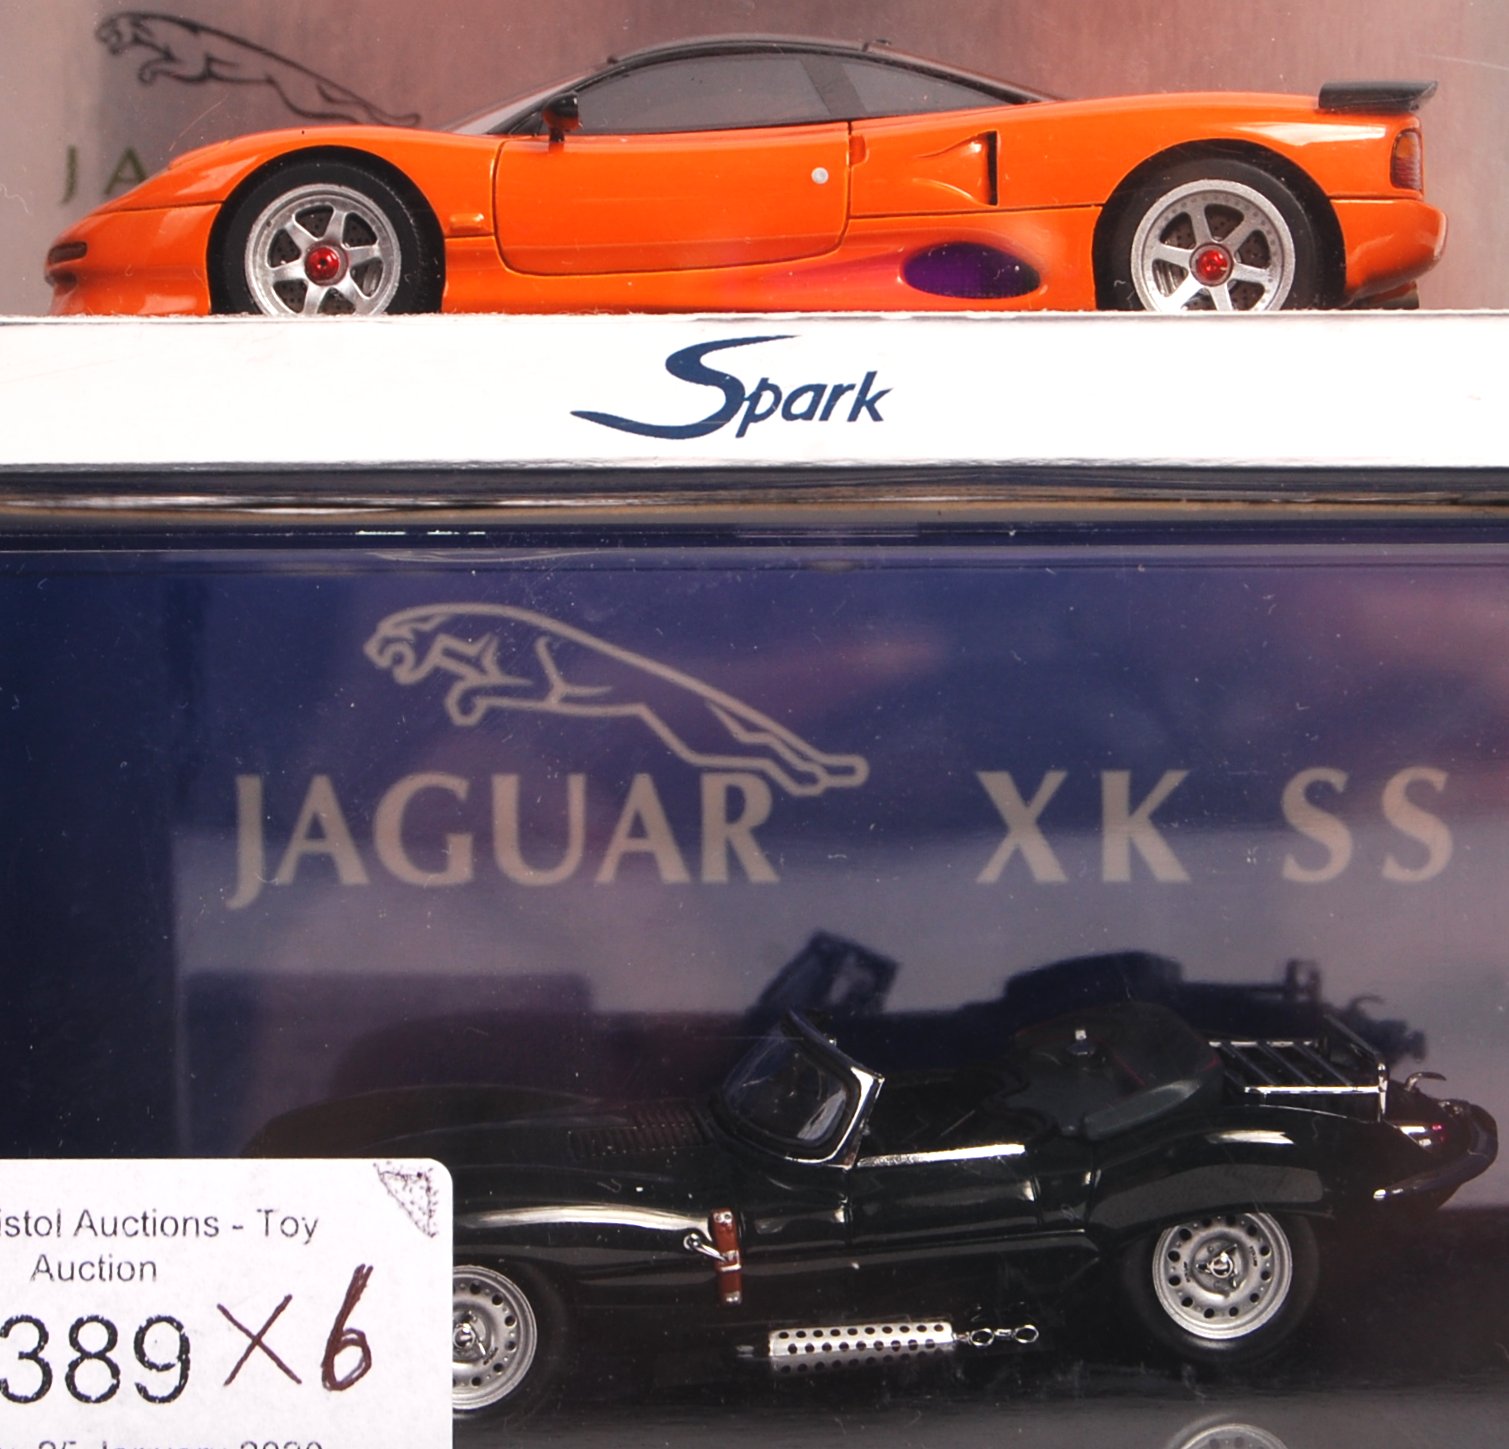 COLLECTION OF 1/43 SCALE AUTOART AND SPARK DIECAST MODELS - Image 4 of 4